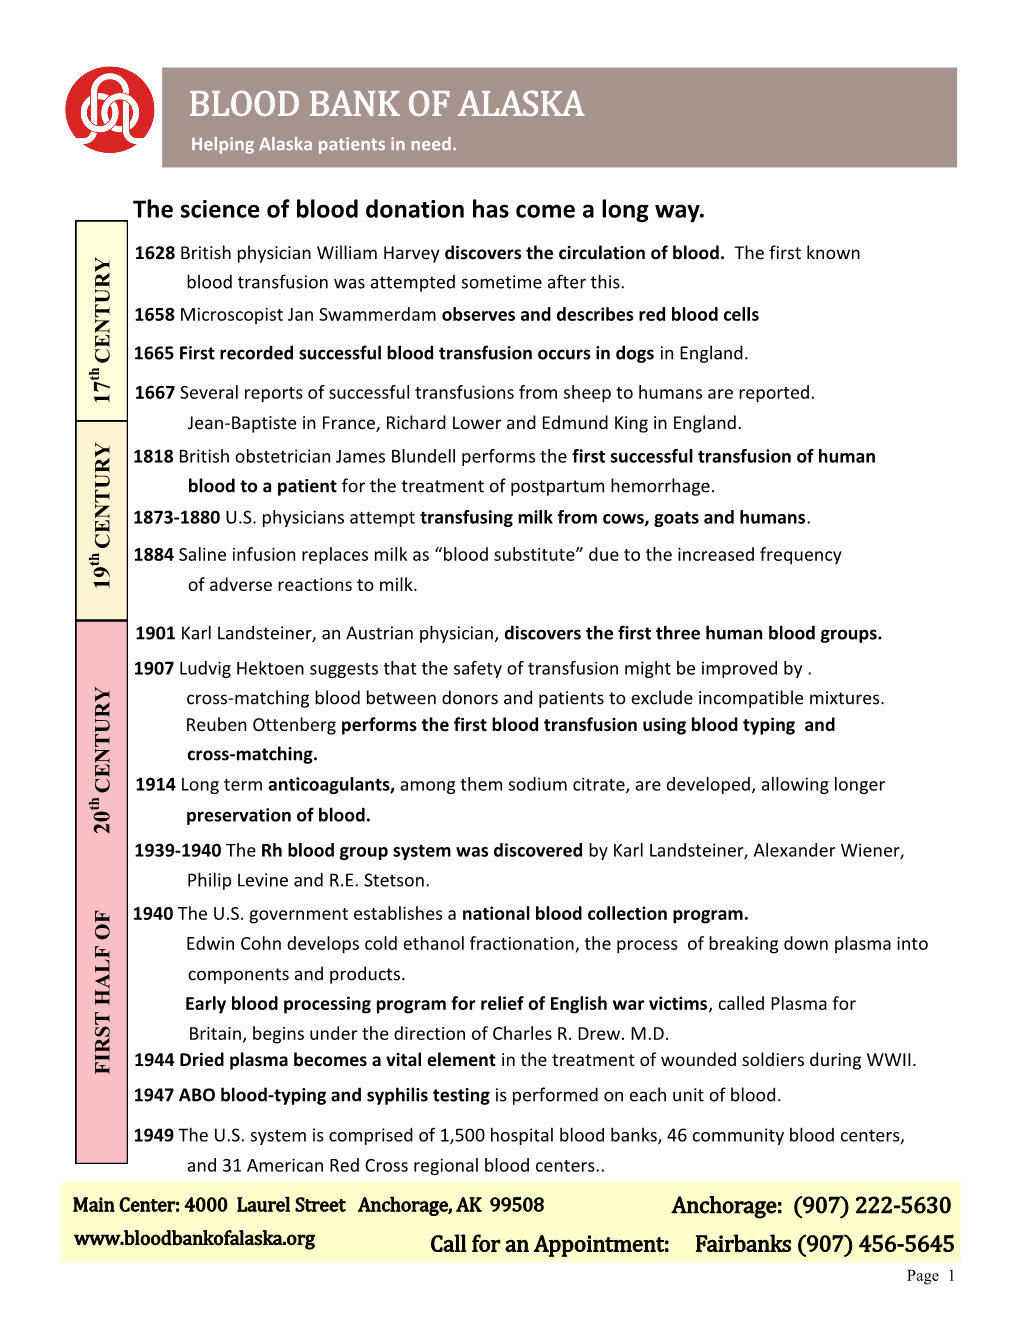 History of Blood Banking